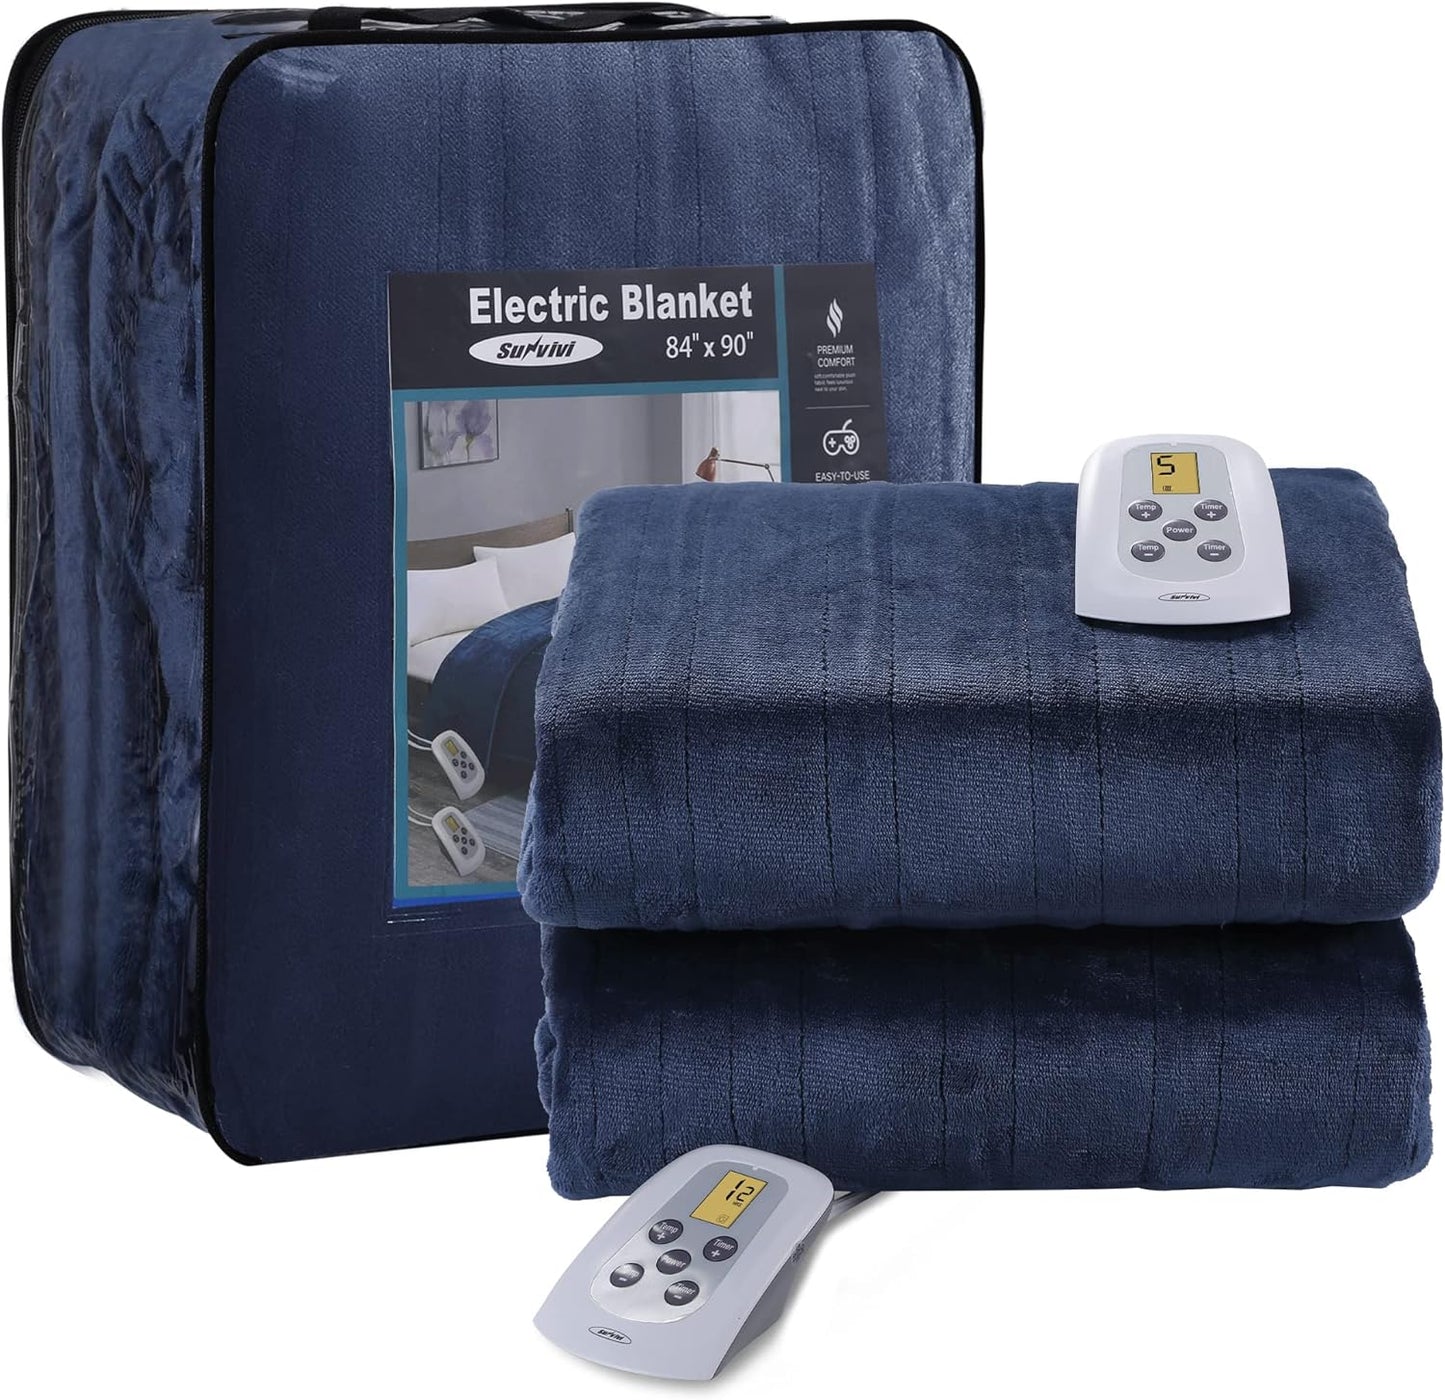 Electric Heated Blanket King Size, Heating Blanket Throw Dual Control, 10 Heat Settings, 0.5-12 Hours Auto Off, Machine Washable, ETL Certified